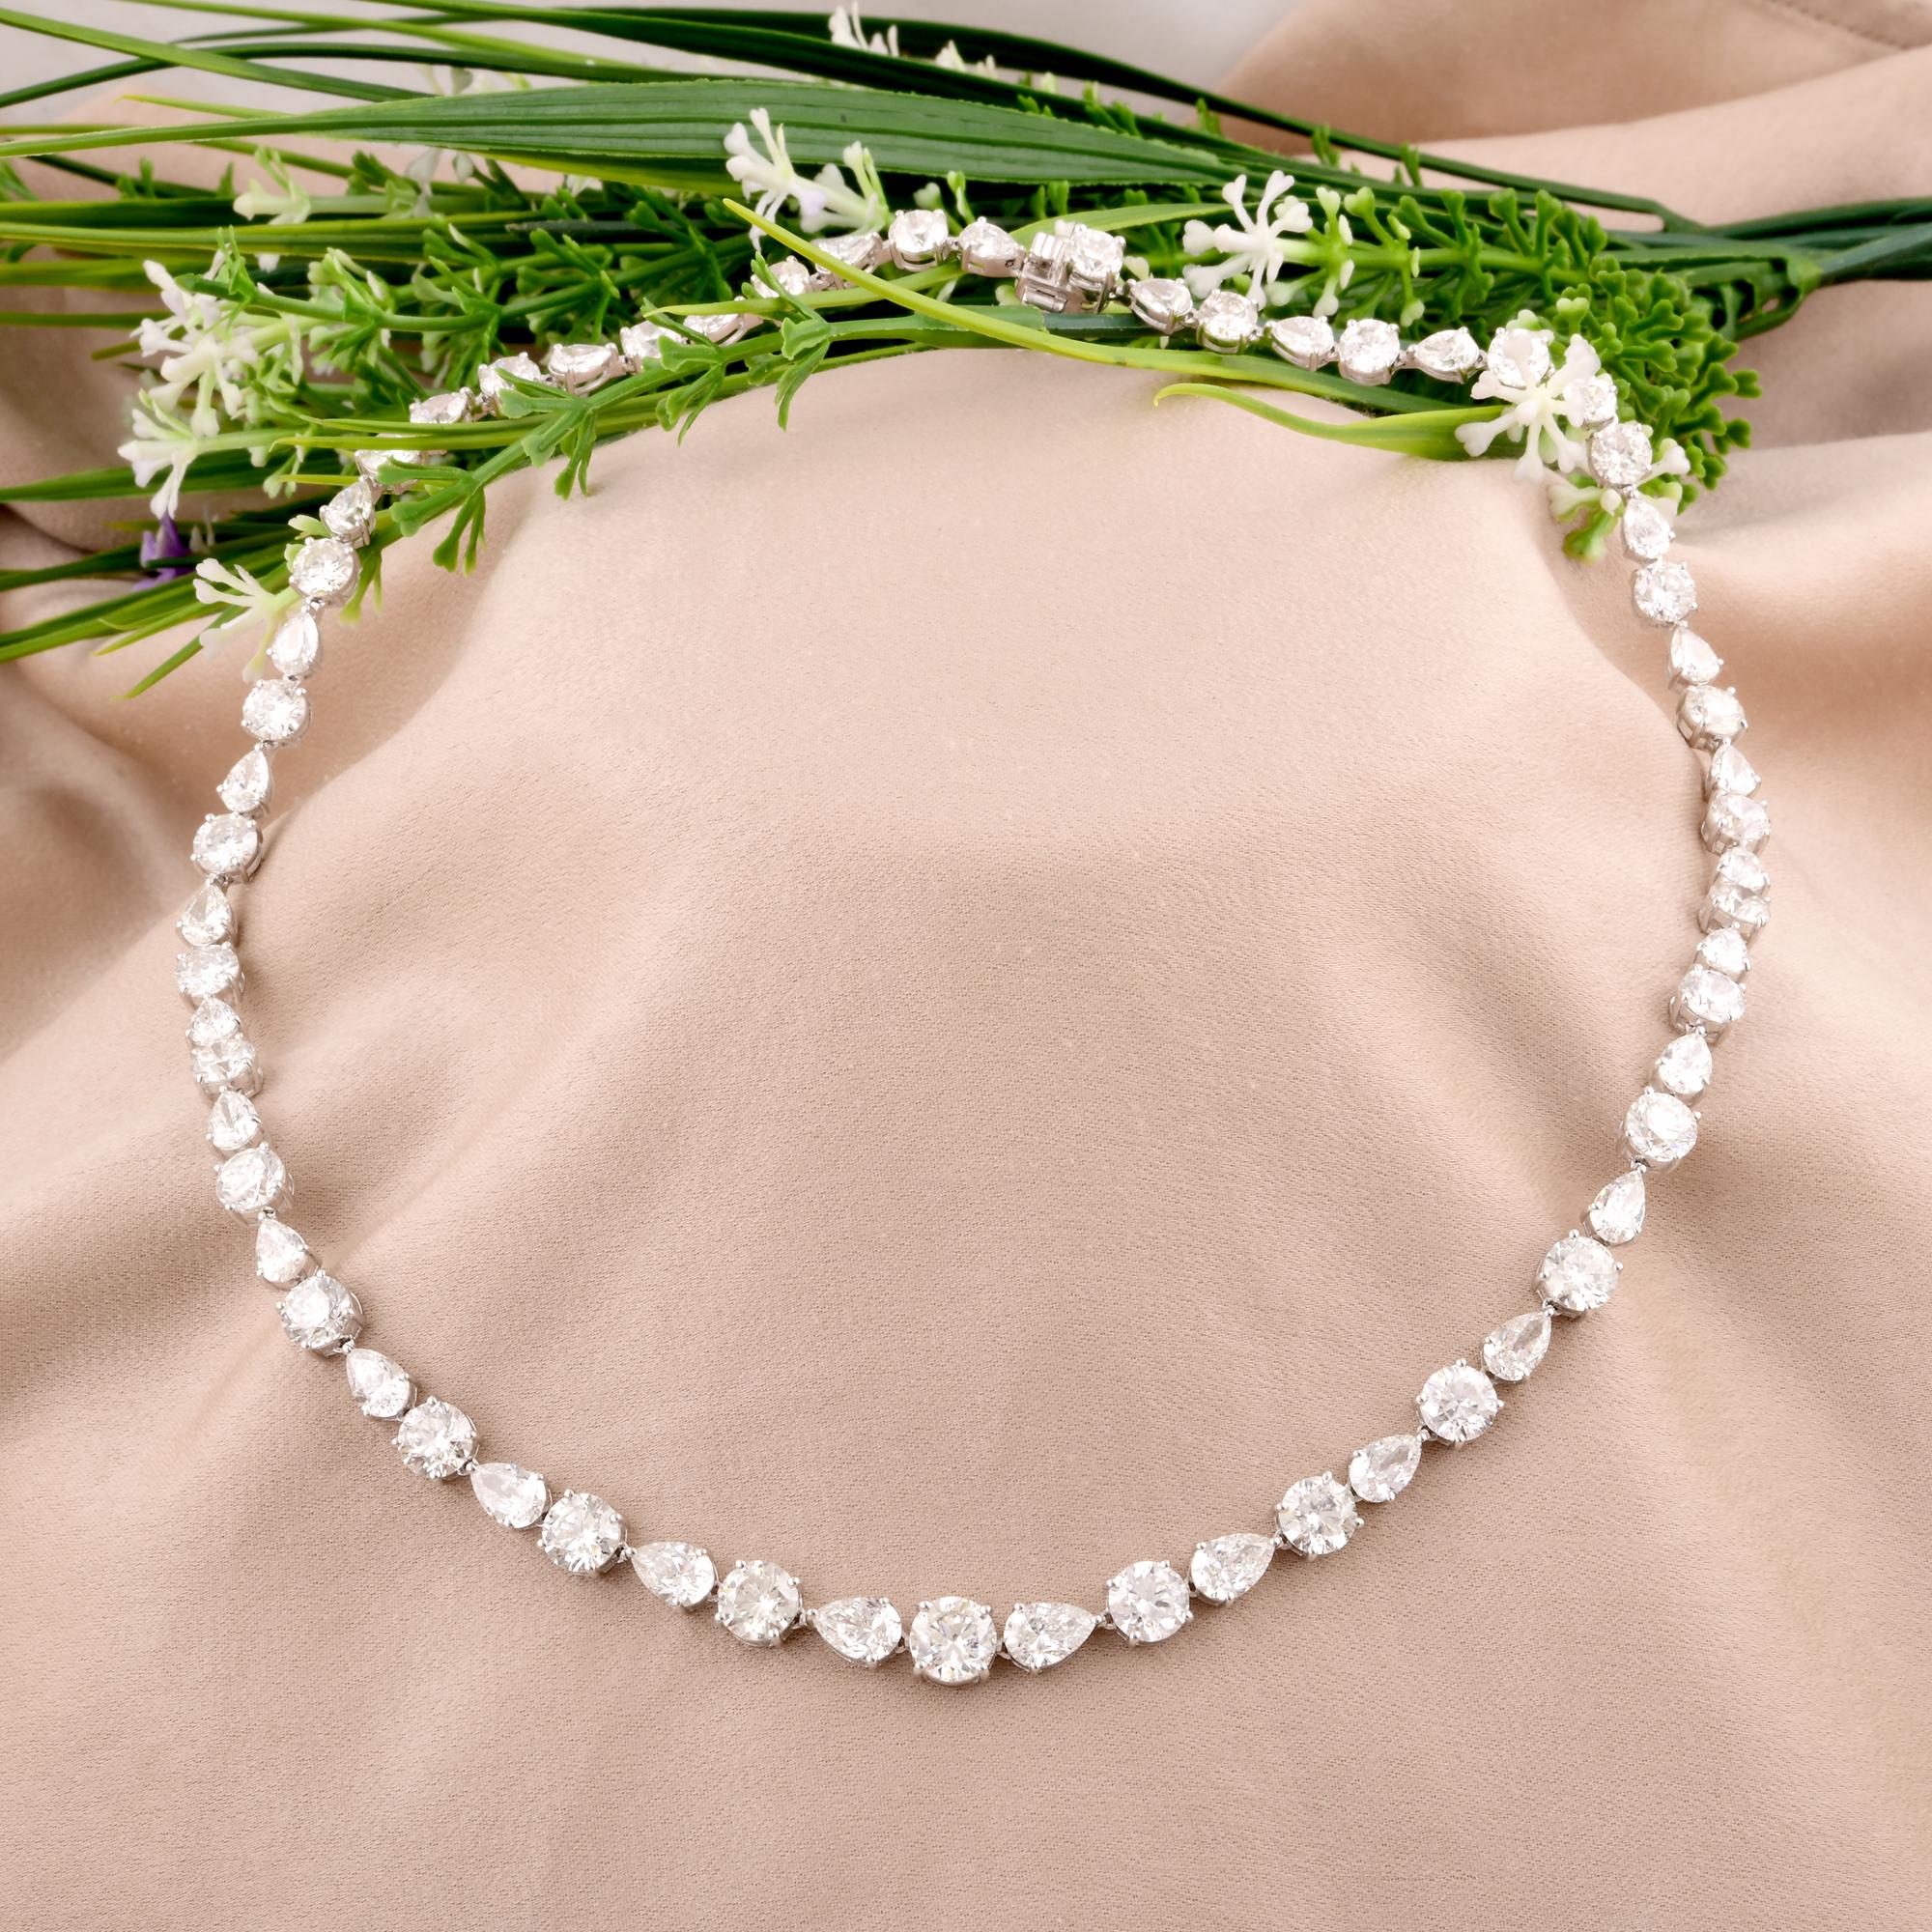 Modern 29.08 Carat Round Pear Shape Diamond Necklace Solid 18 Karat White Gold Jewelry For Sale